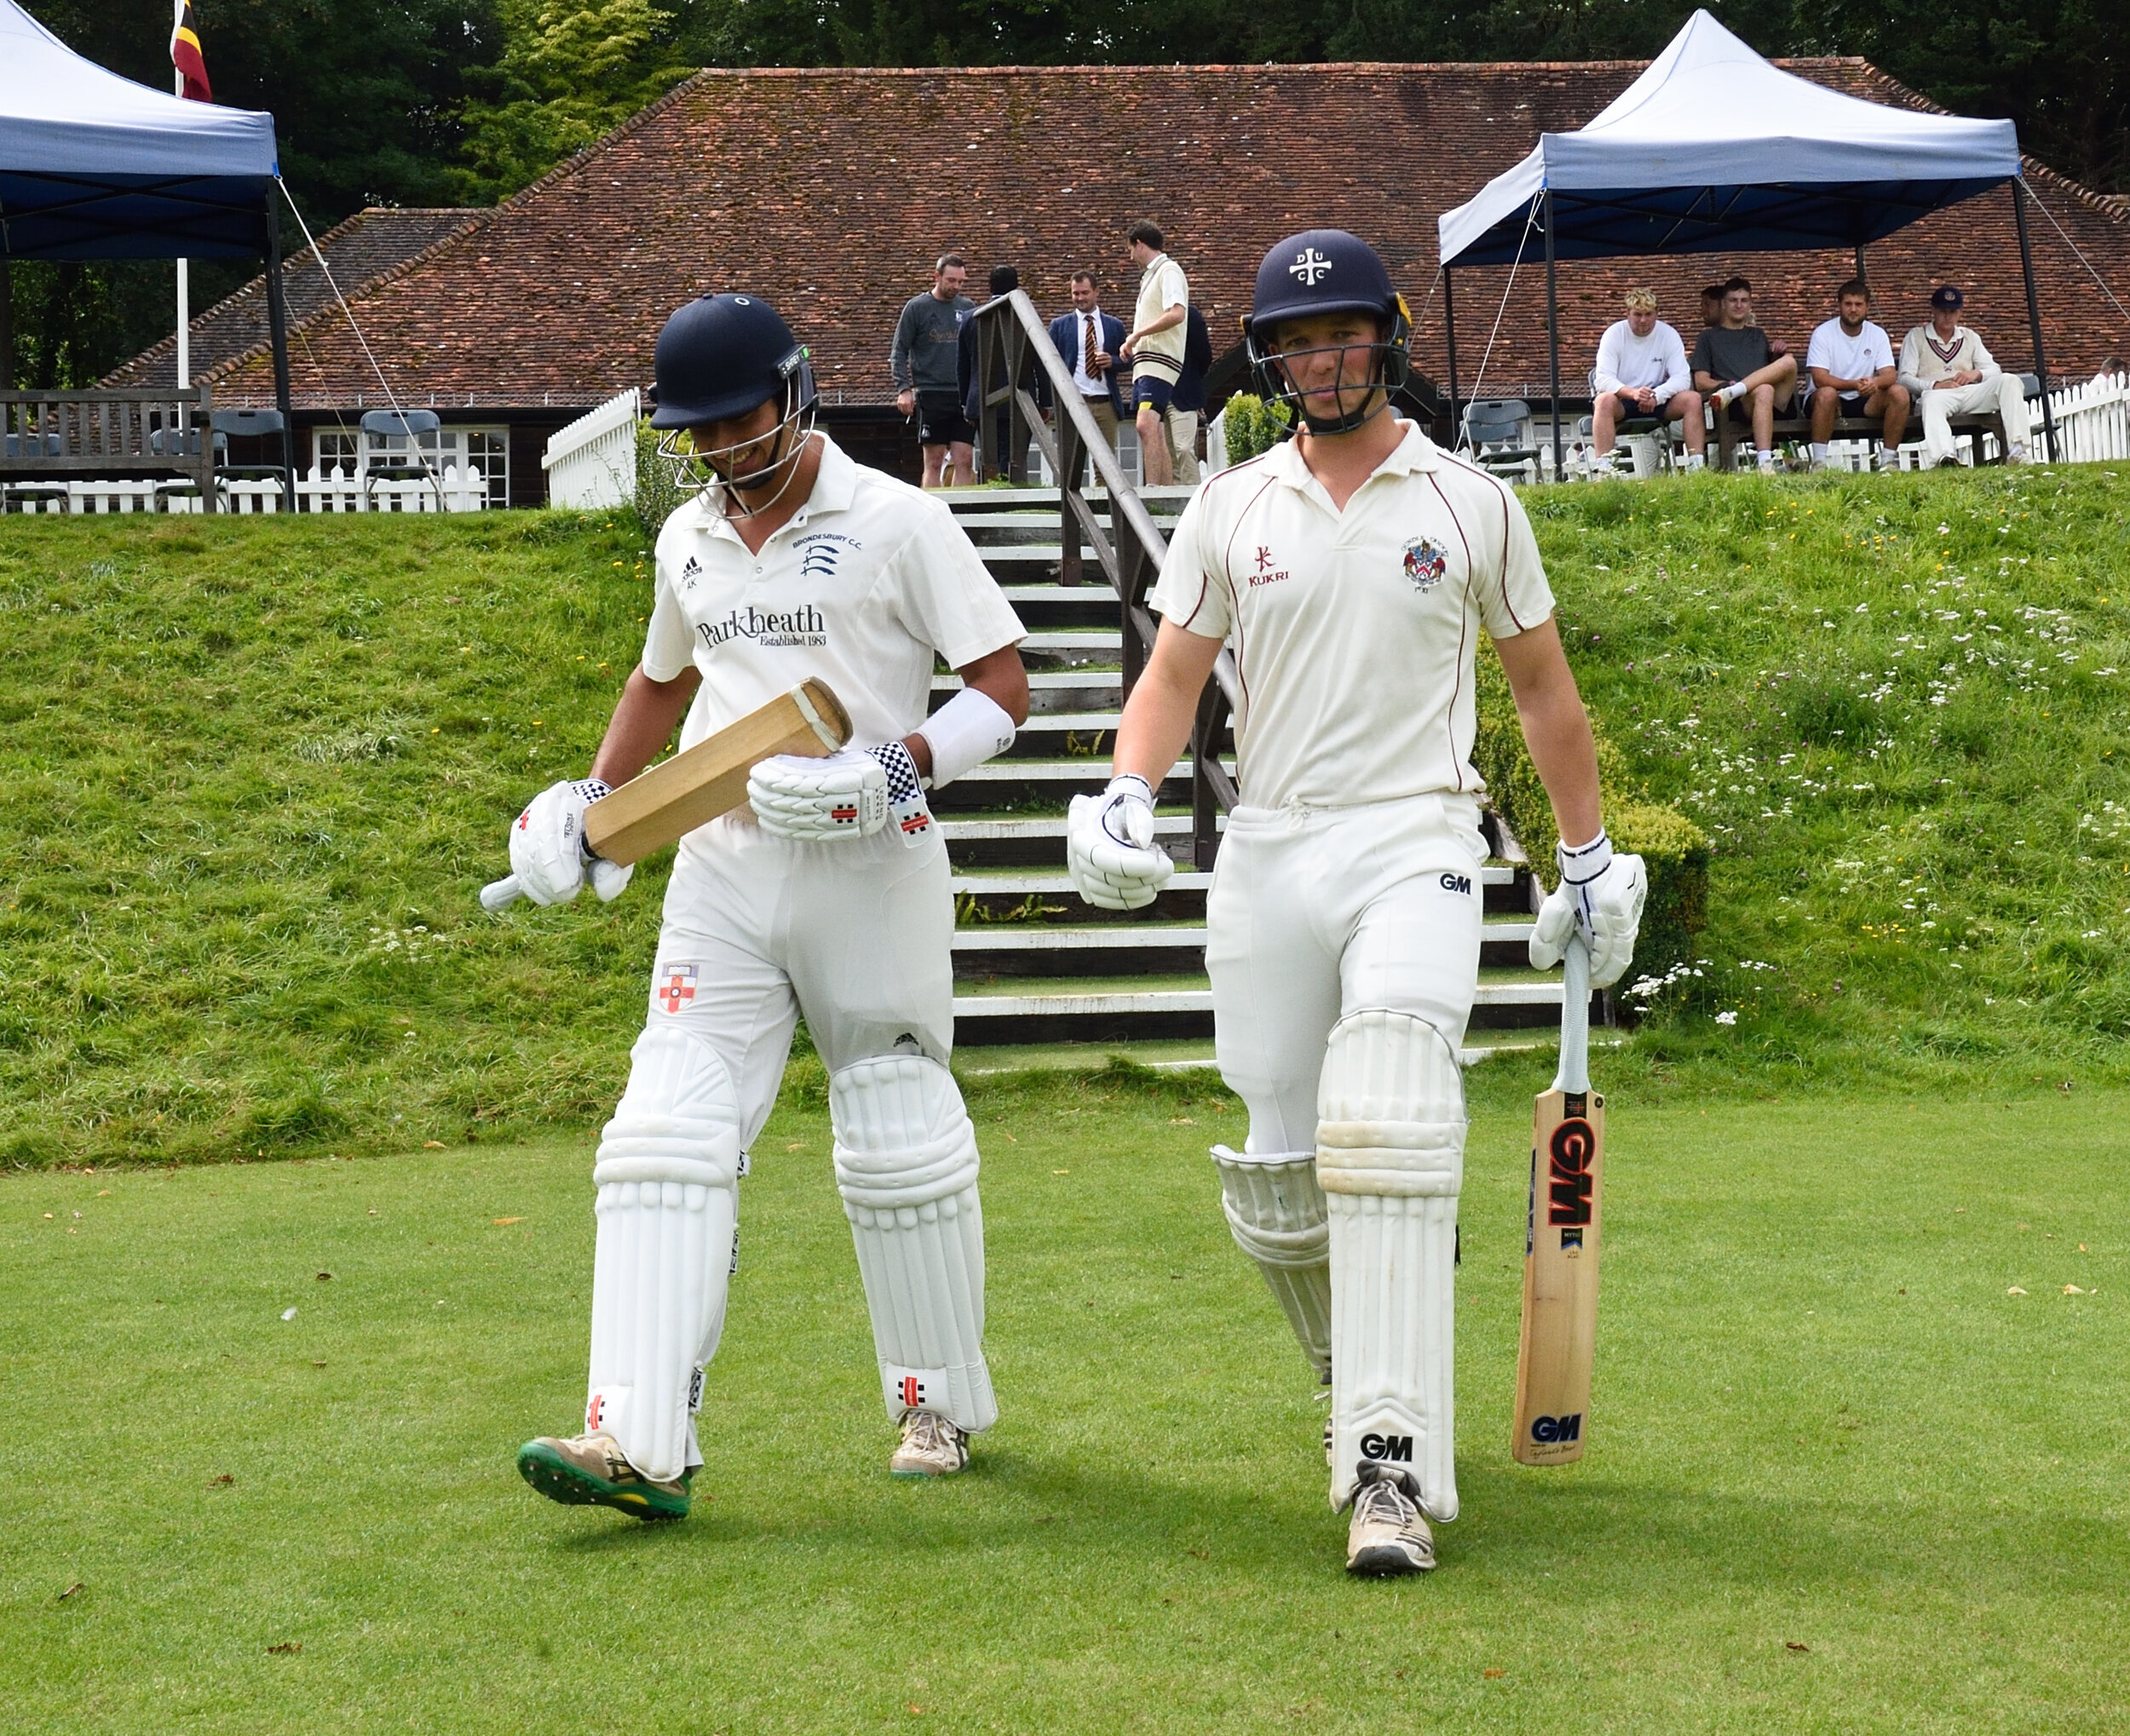 Ben Graves and Amartya Kaul open for Oundle Rovers